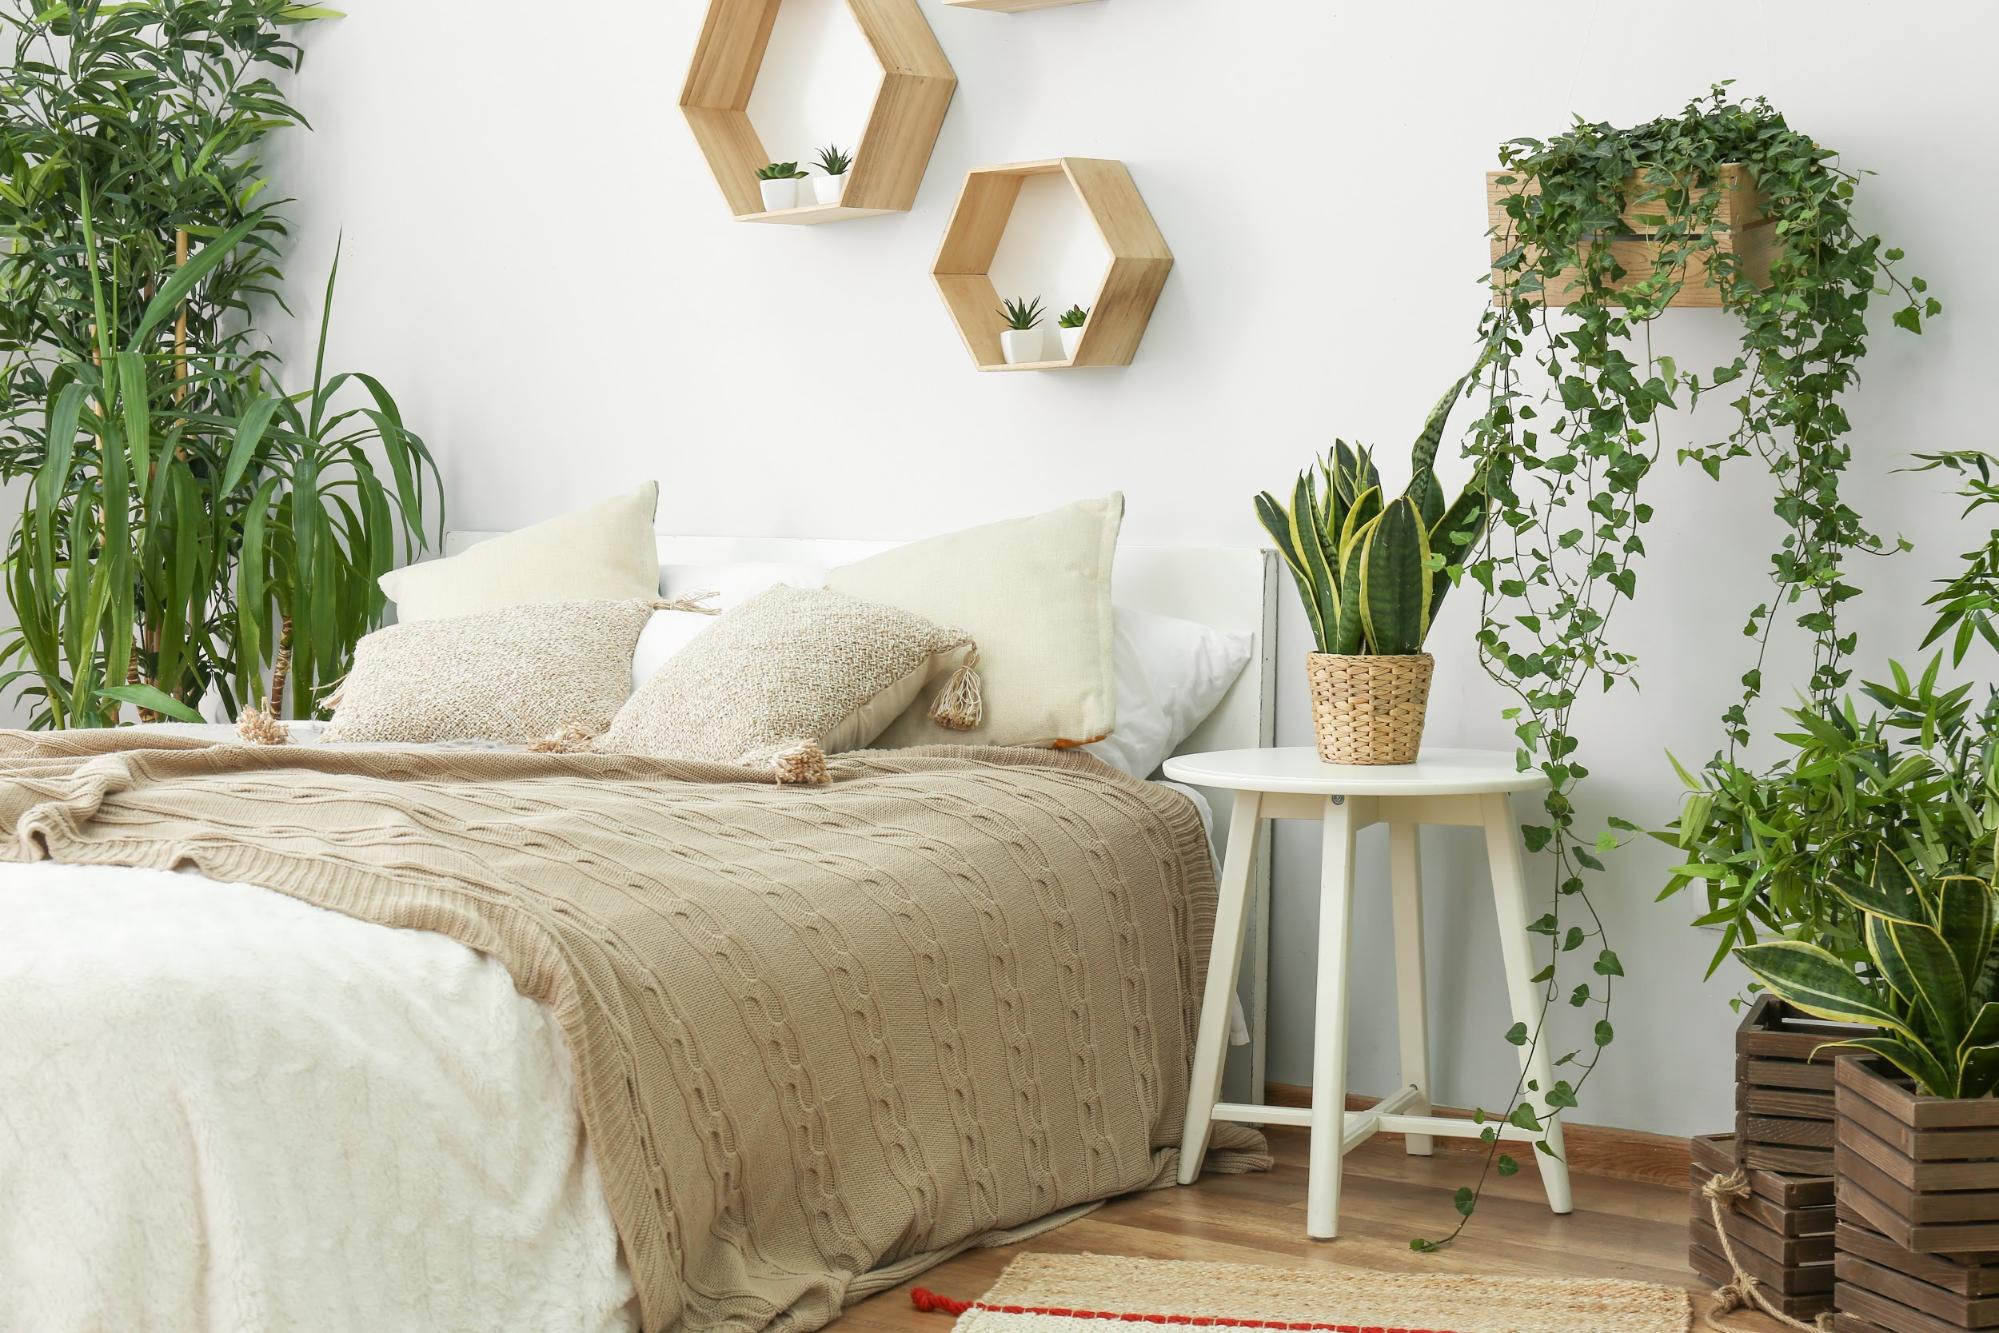 A tranquil bedroom filled with green houseplants